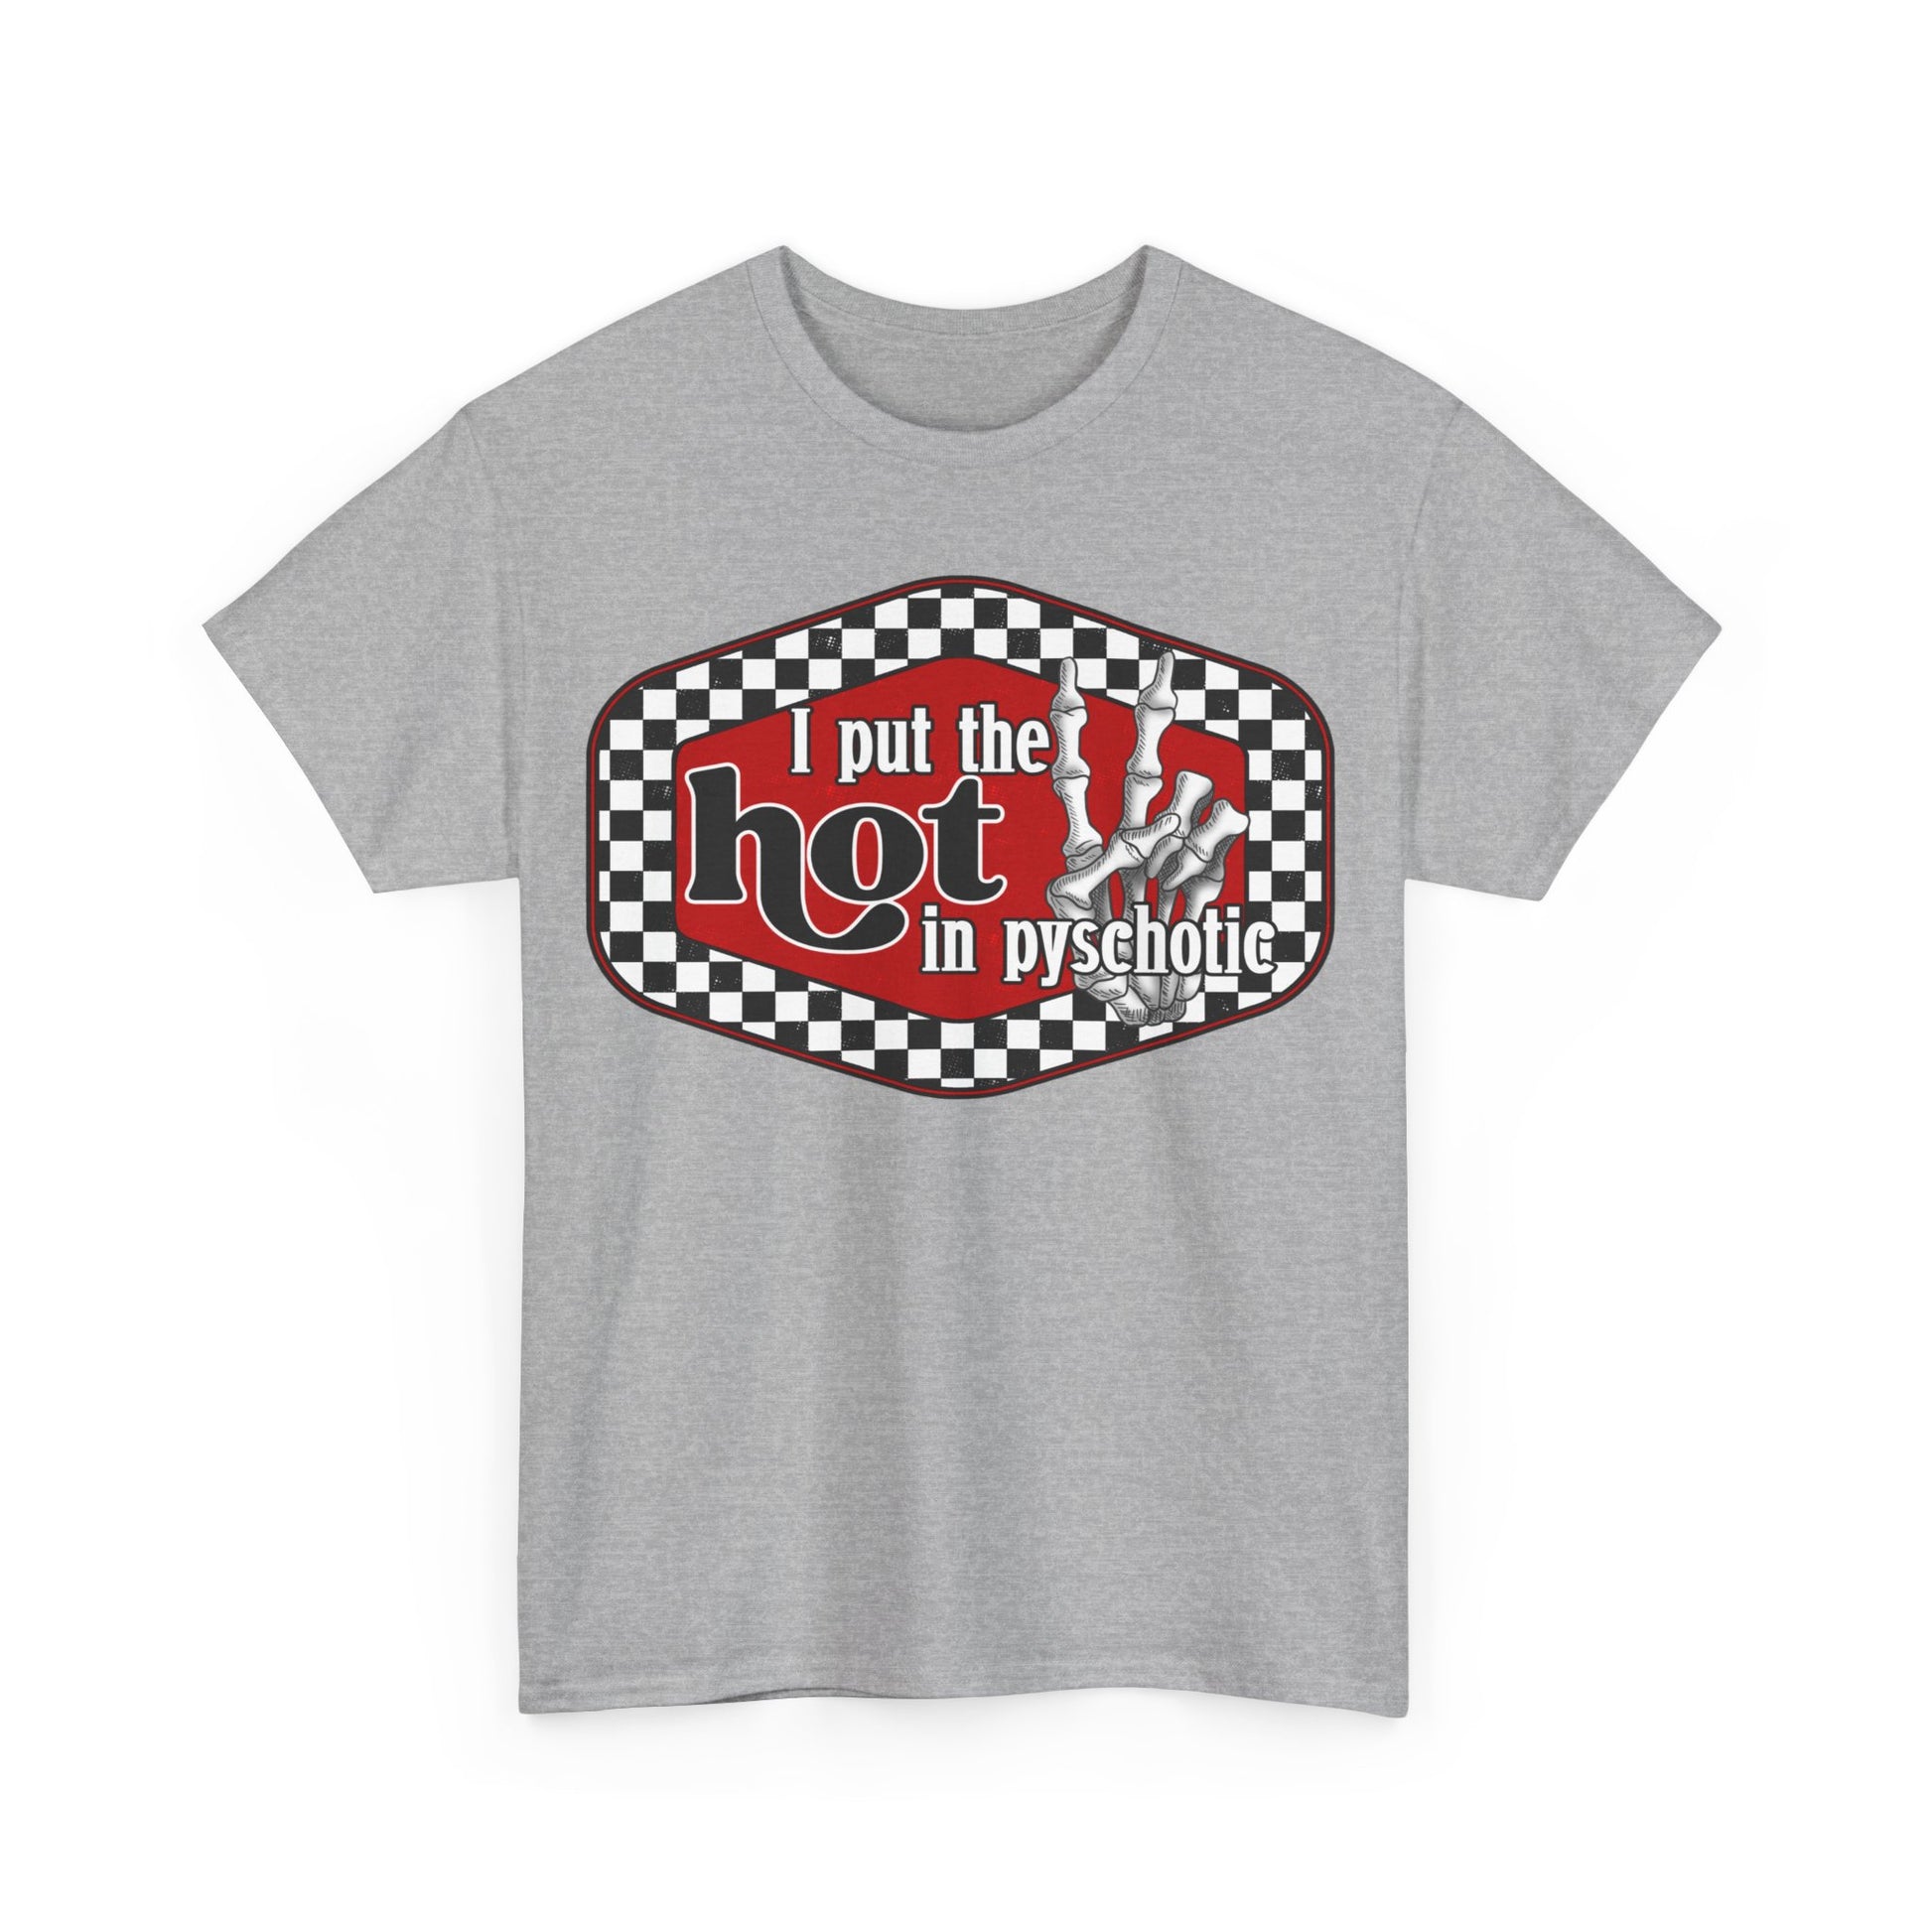 I put the hot in psychotic,Quirky Tee, Trendy T-Shirt,Racing Check Fashion